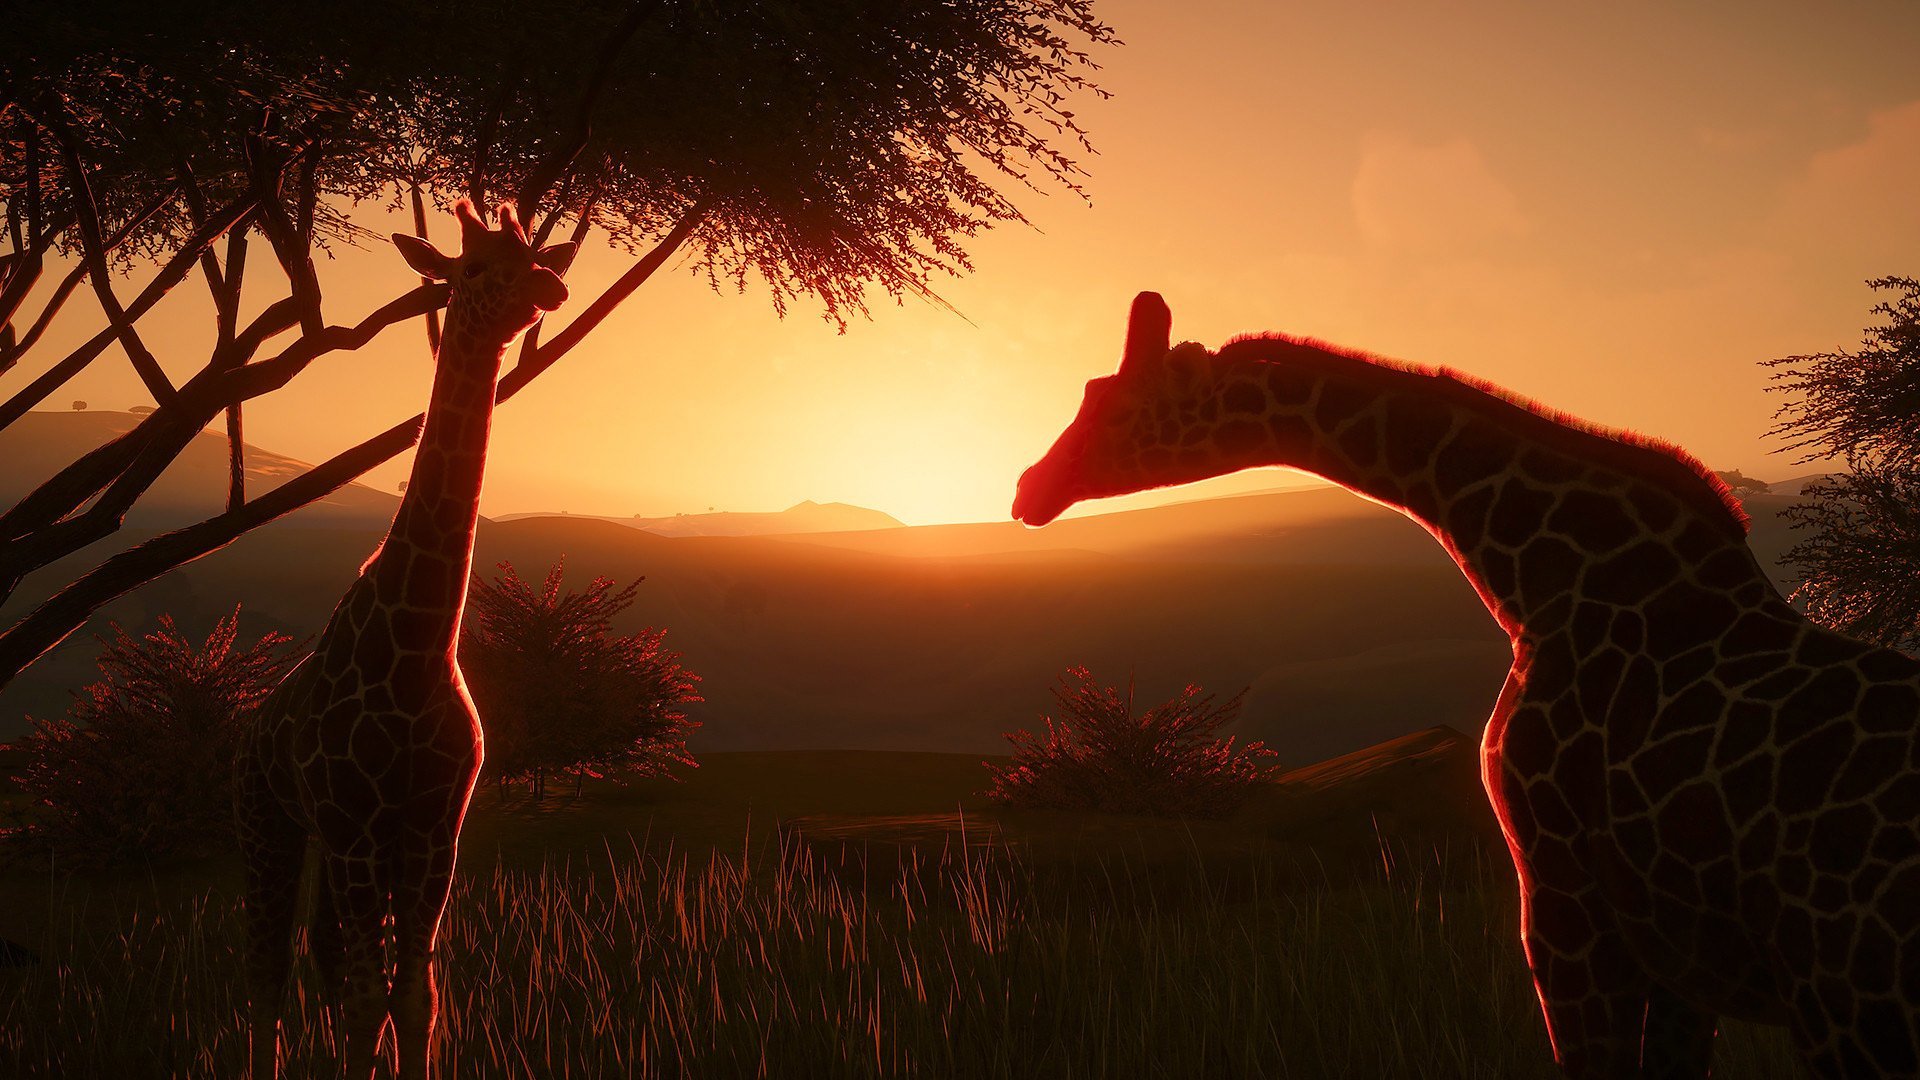 A sunset scene with giraffes in Planet Zoo